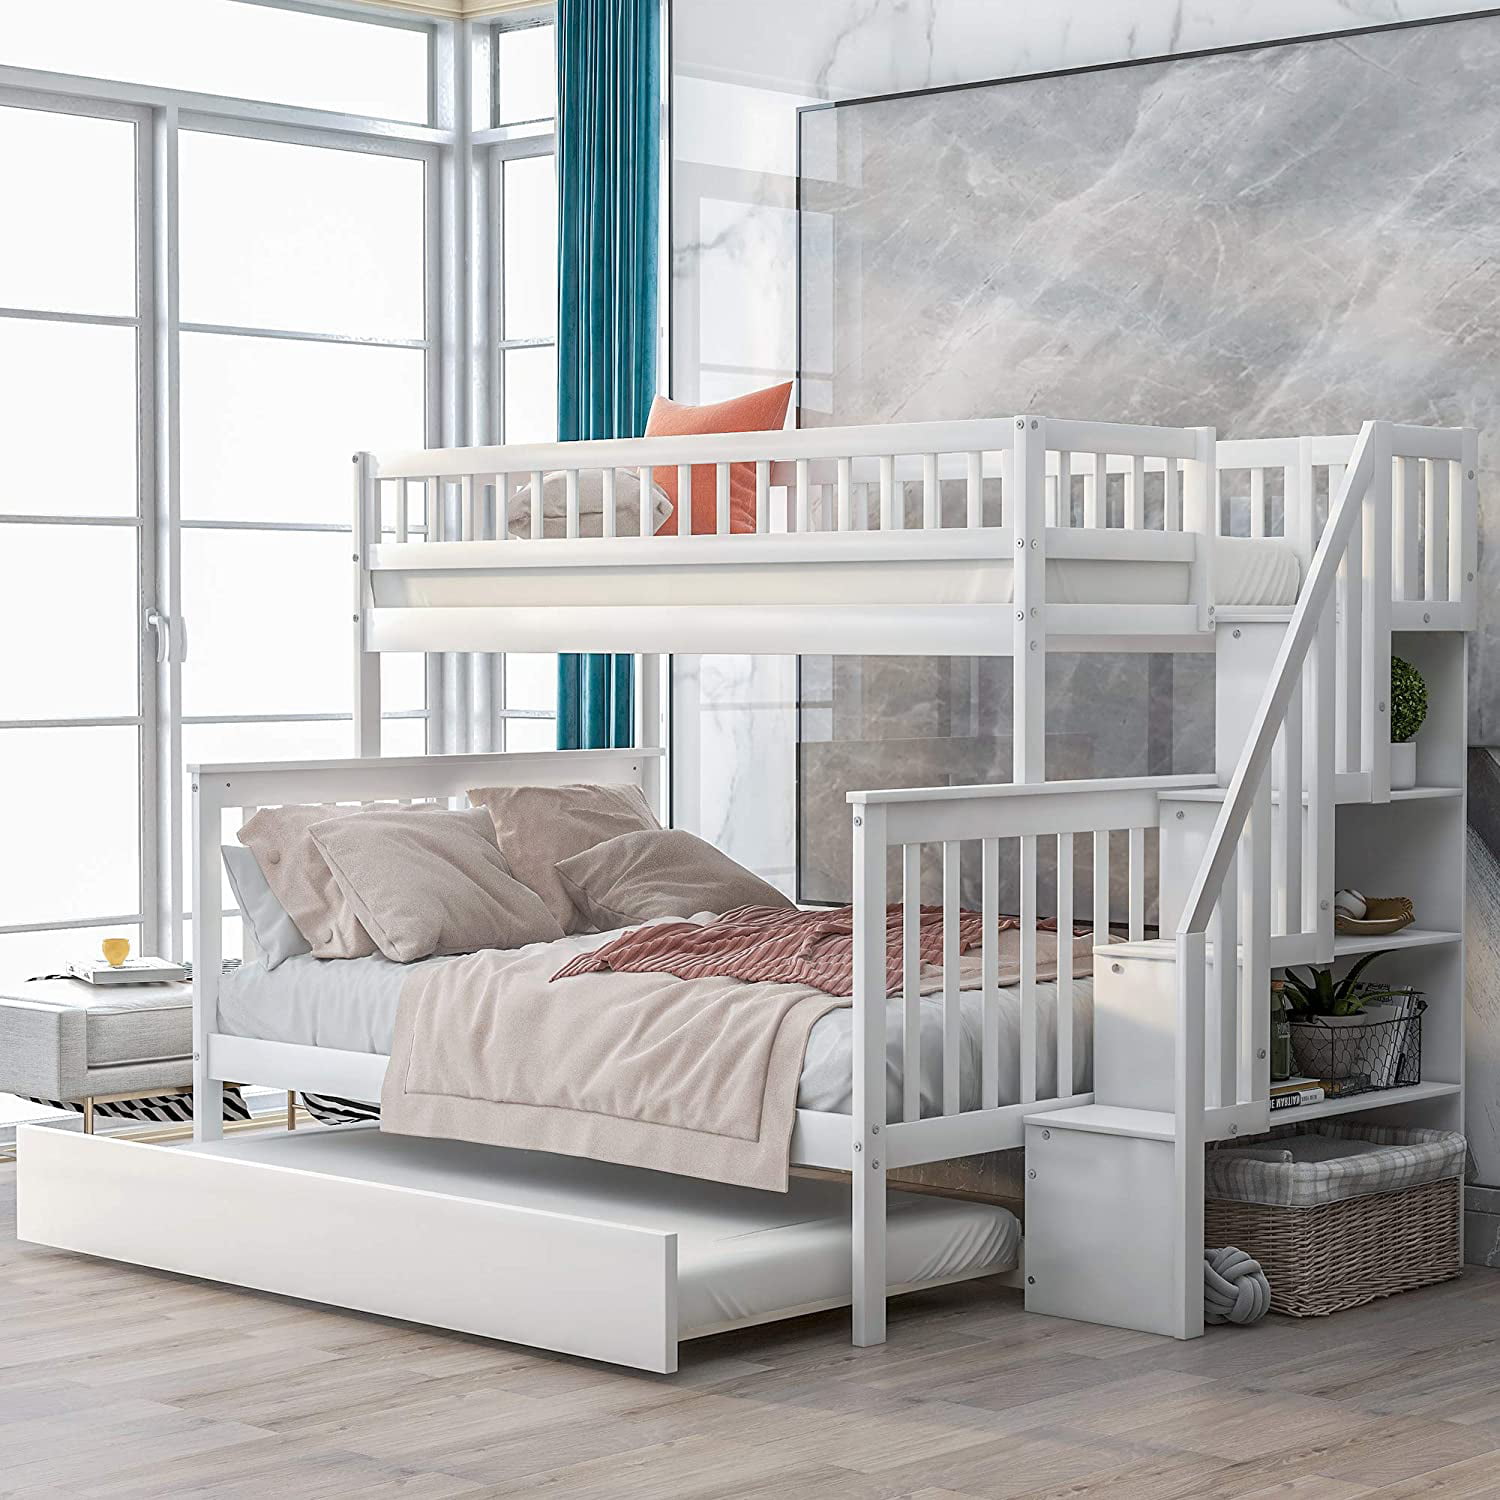 Piscis Bunk Bed Beds Twin Over, Girls Bunk Beds Twin Over Full